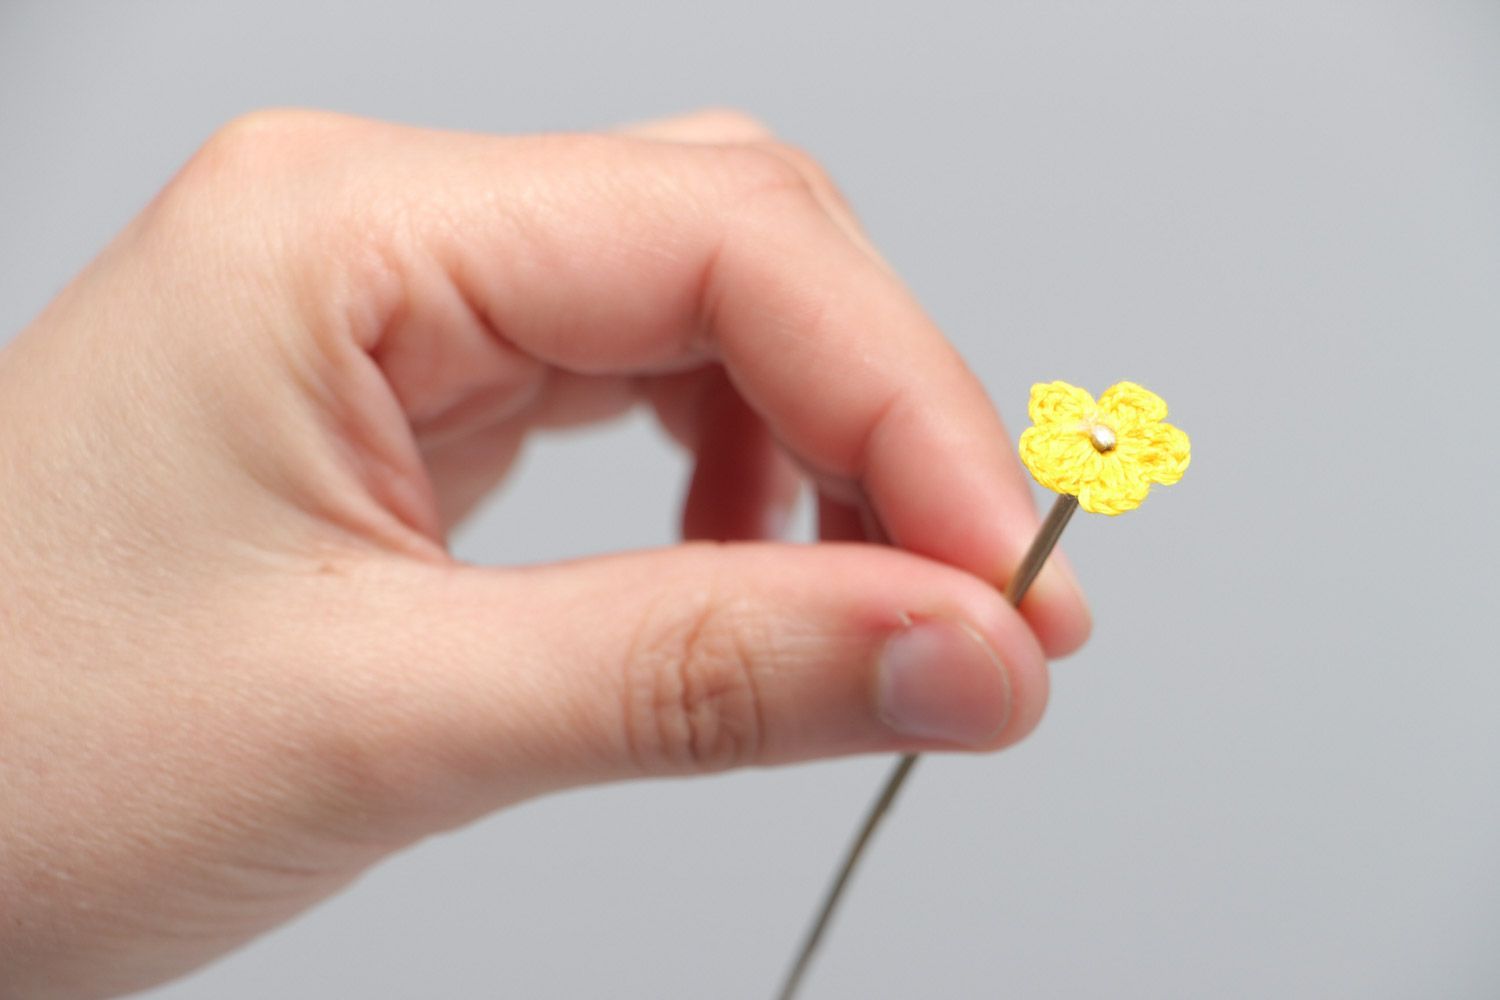 Handmade tender small artificial yellow flower crocheted of cotton threads photo 5